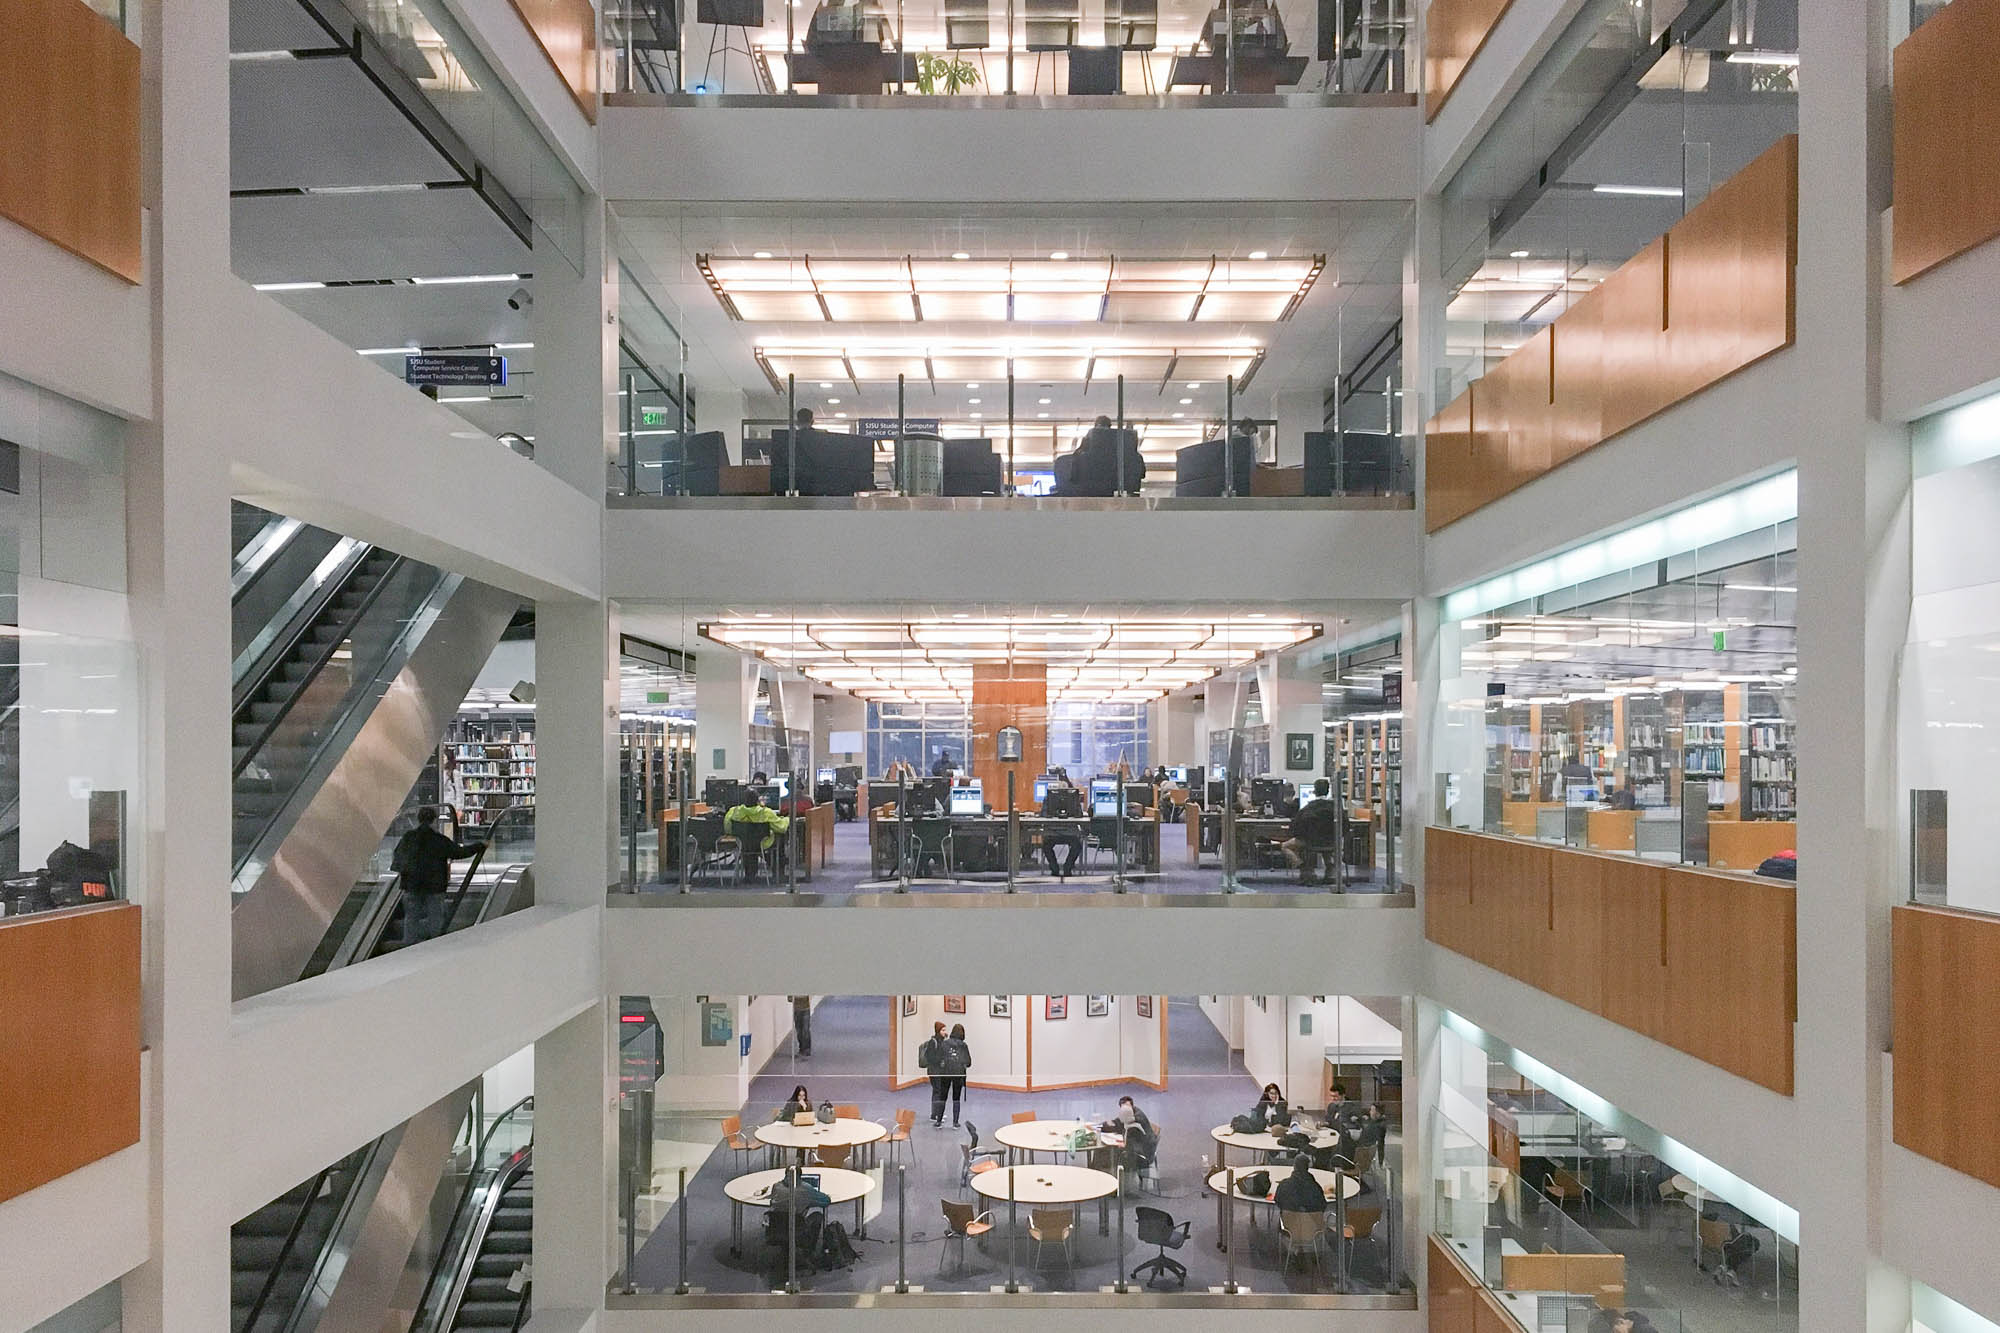 Interior of a postmodern library atrium. We see four levels of the library, with patrons seated at tables, and bookshelves. Escalators are seen to the left.